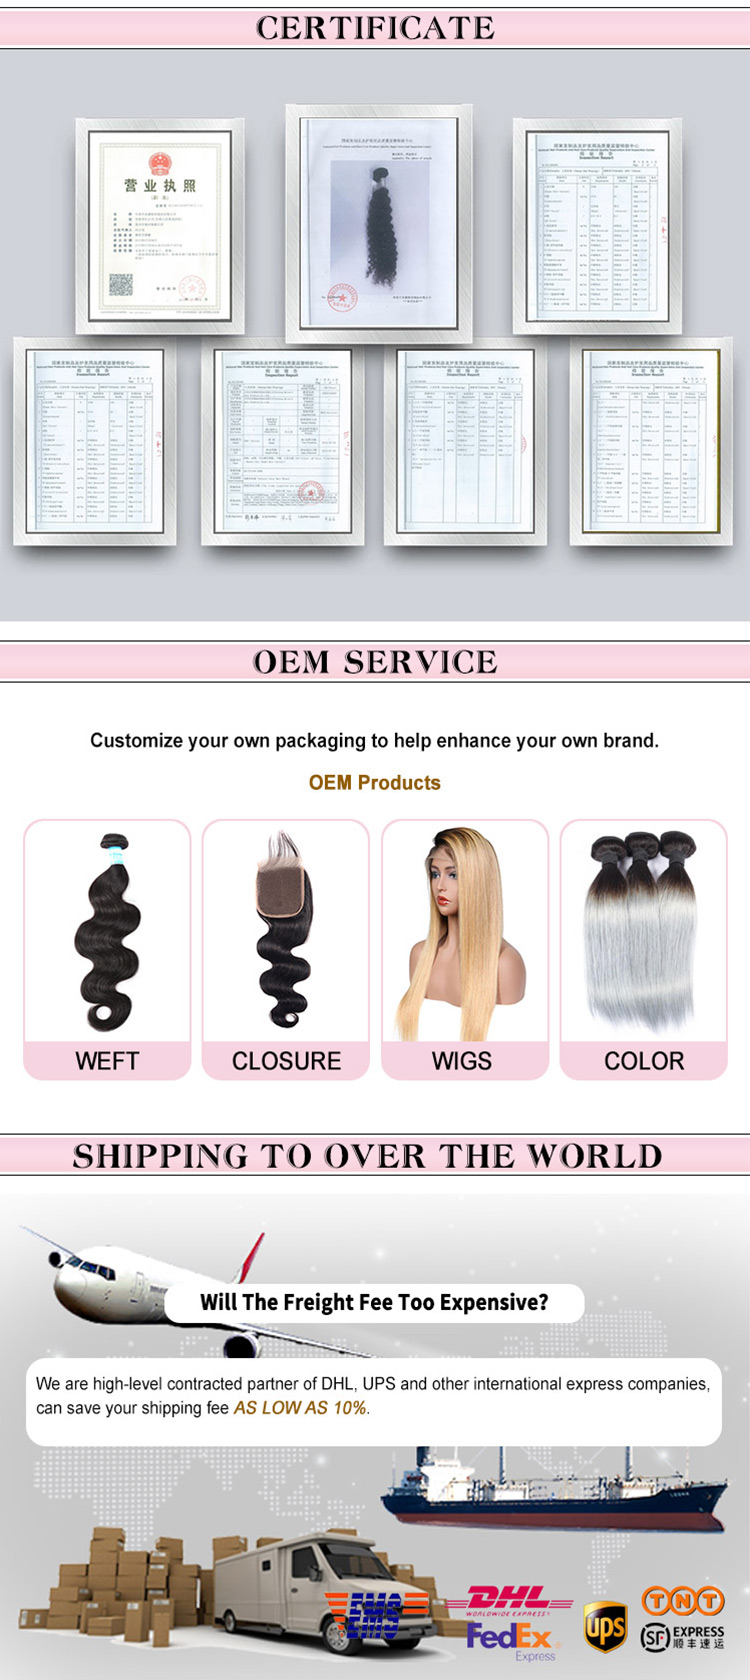 13x4 Lace Front Human Hair Wigs Ombre Brazilian Straight Lace Front Wigs Remy Hair Wigs human hair lace front